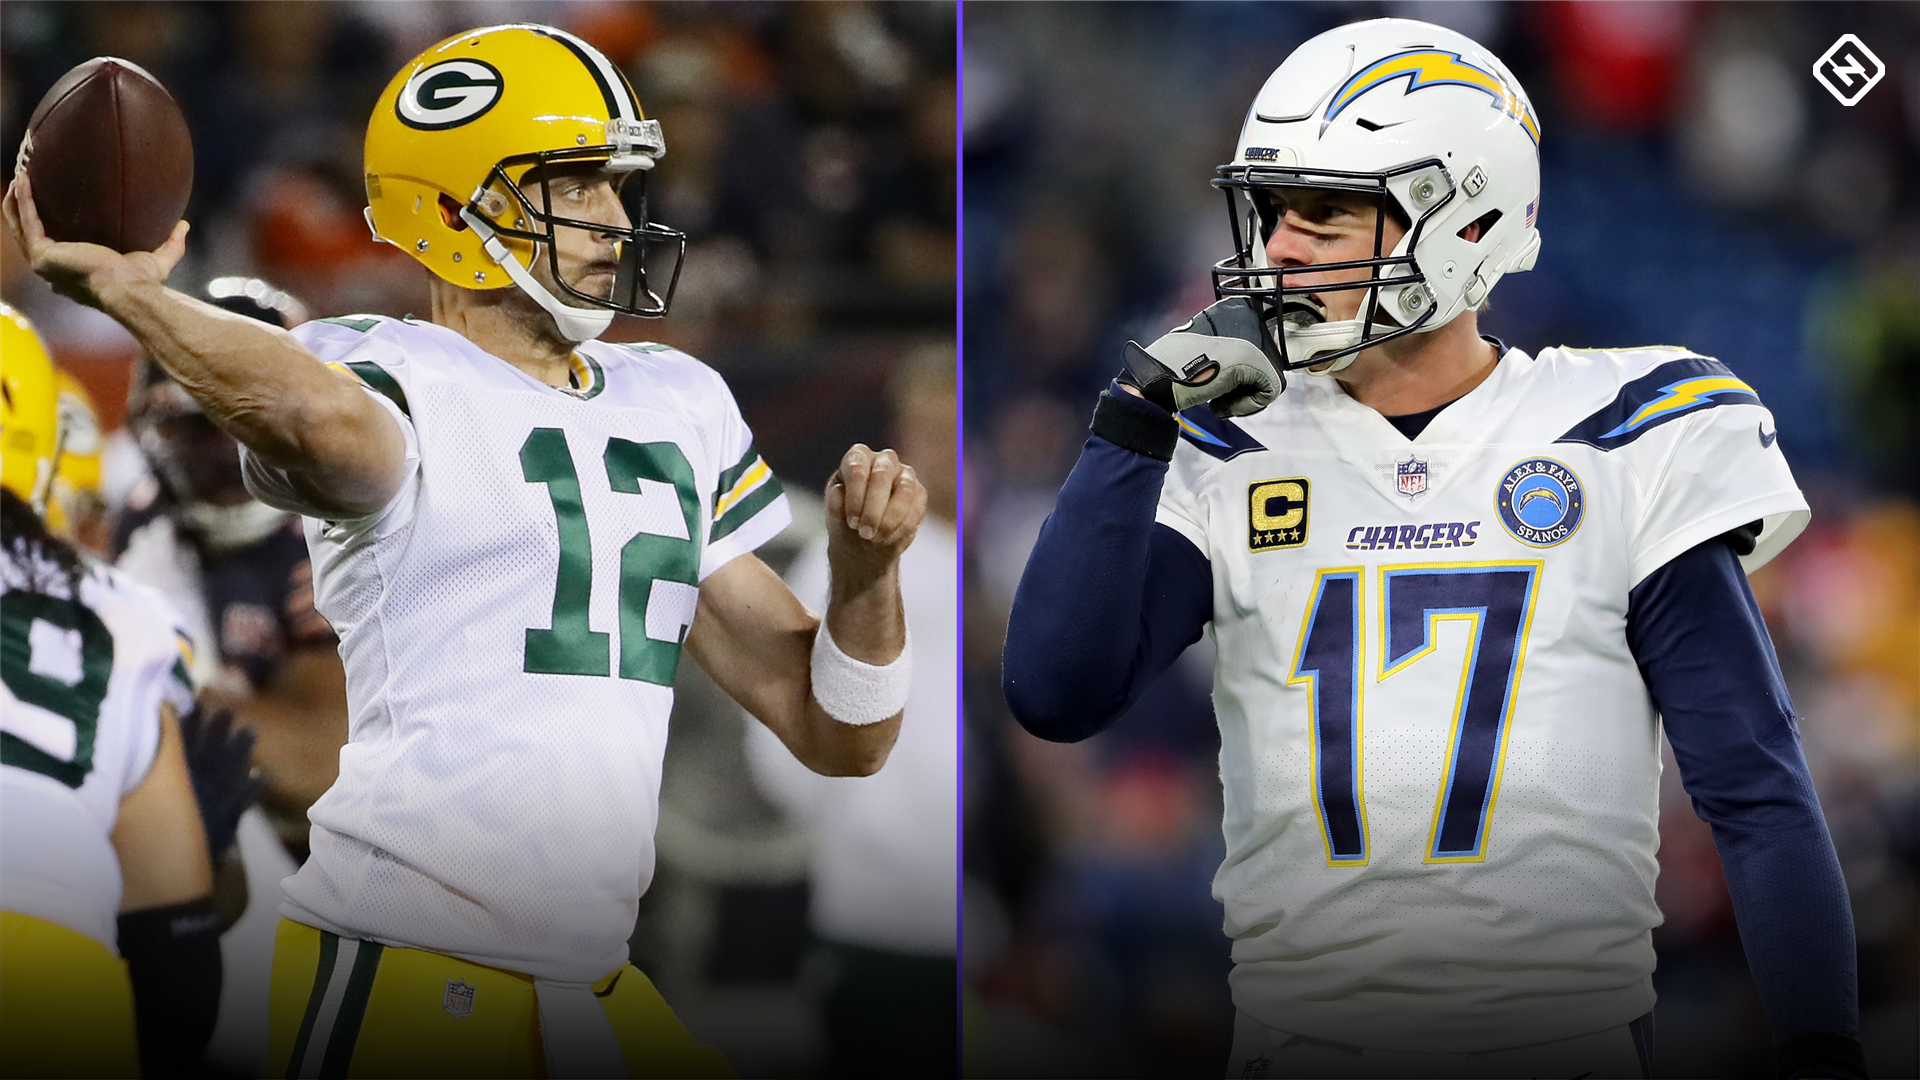 rodgers-rivers-090819-getty-ftr_8vnm4xqzvnms1p094tayo87s2.png